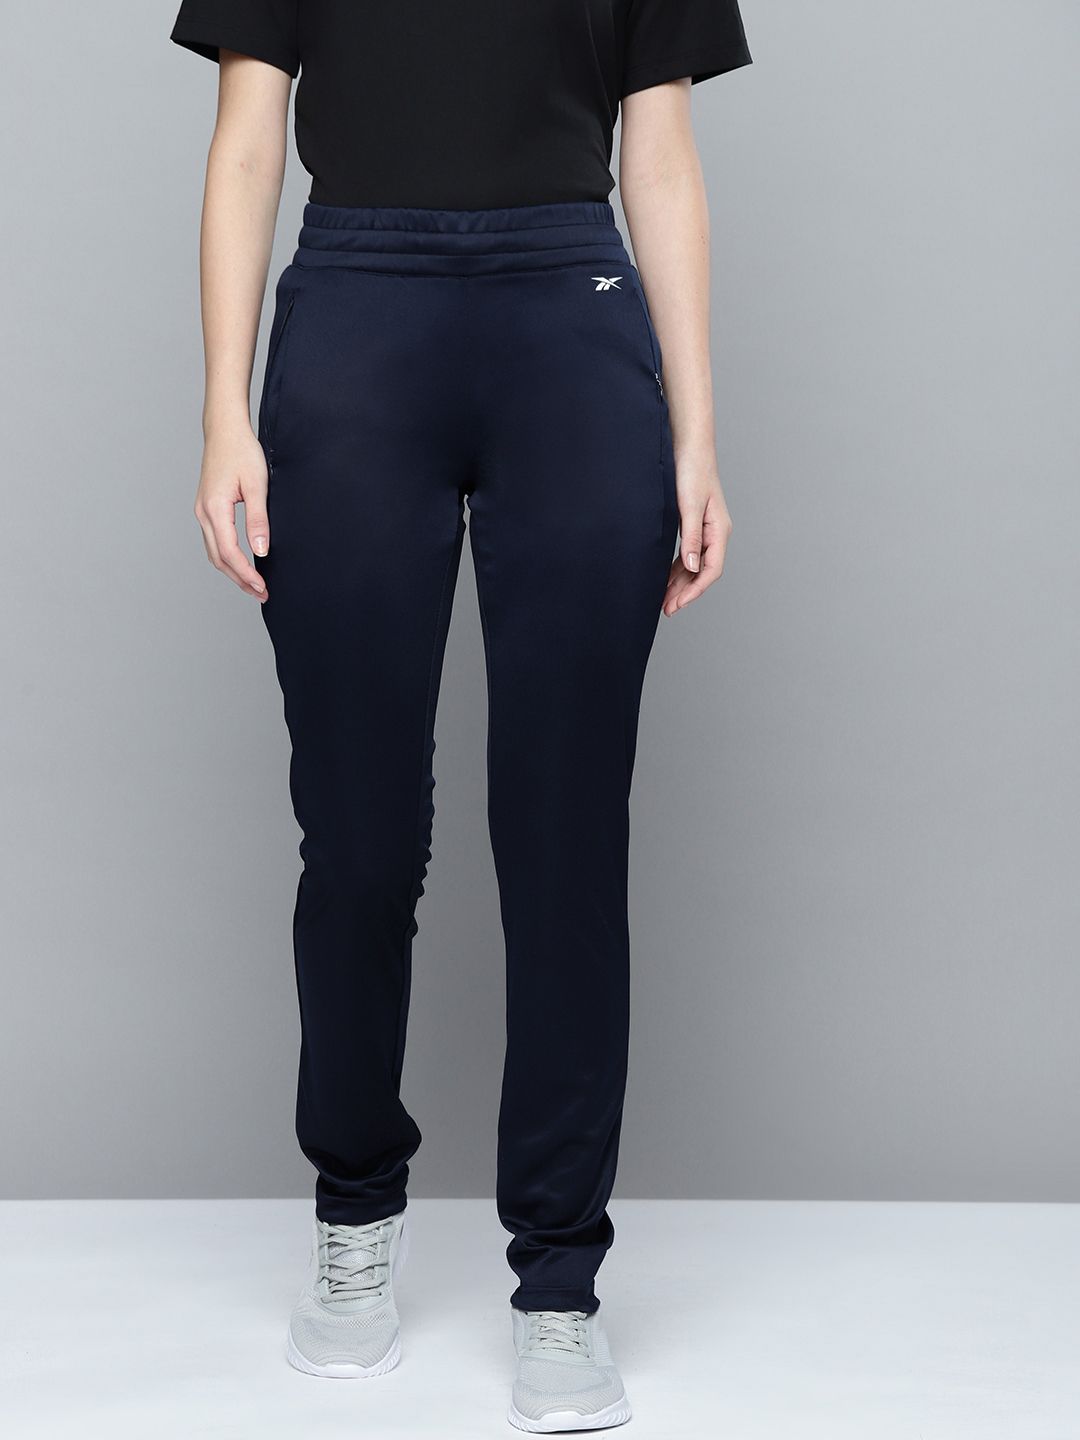 Reebok Women Navy Blue Solid Slim-Fit Training Craft Track Pants Price in India